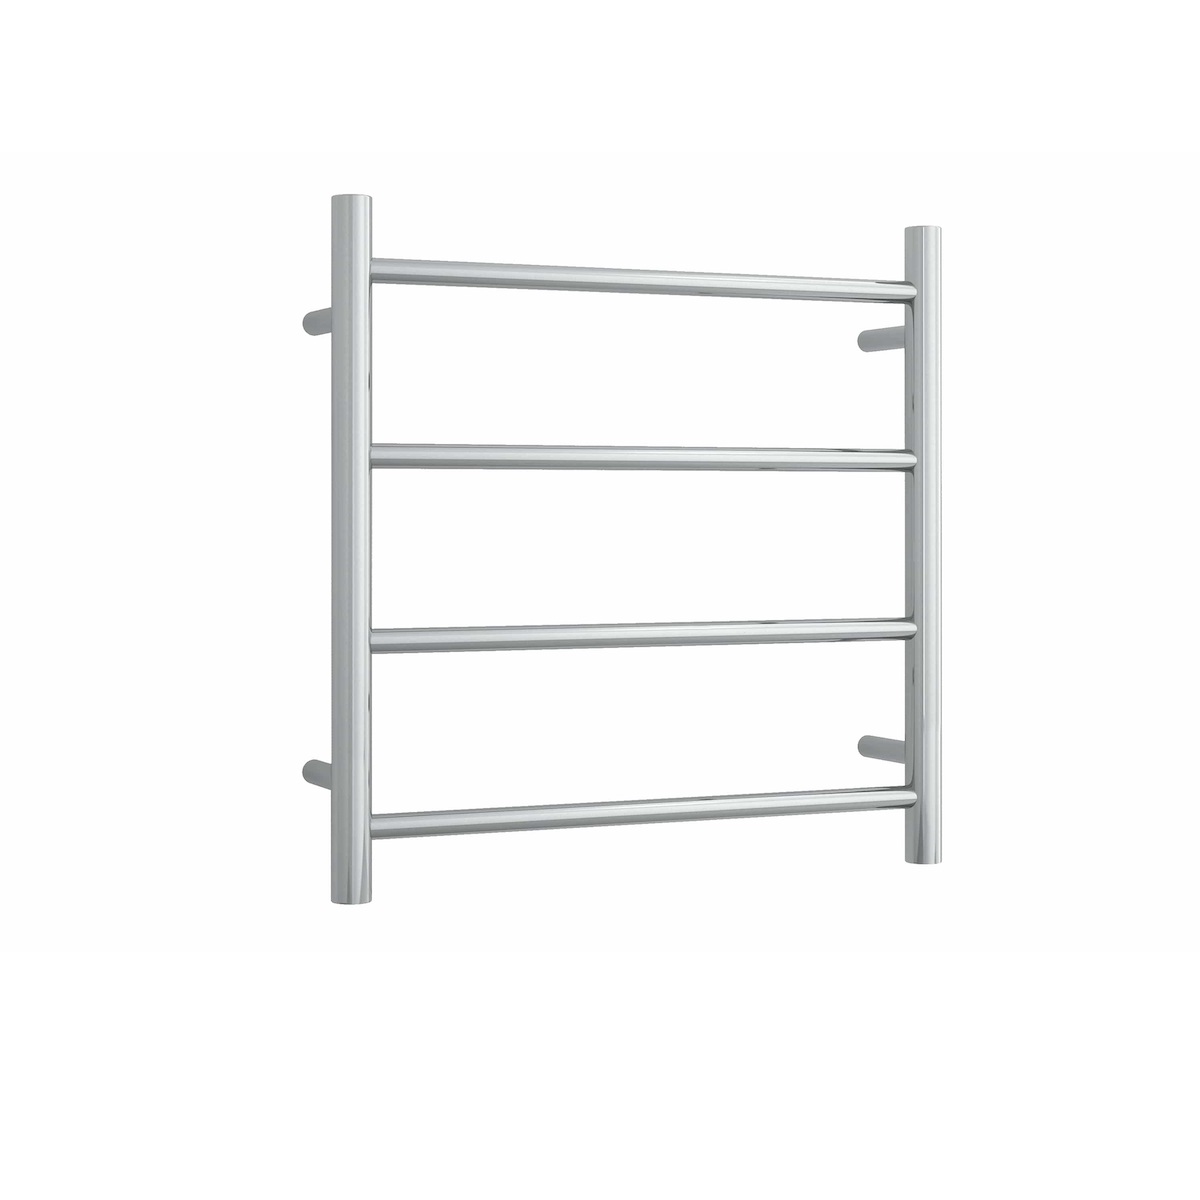 Brushed SS finish heated towel ladder from Infinity Plus bathrooms deliver AU wide